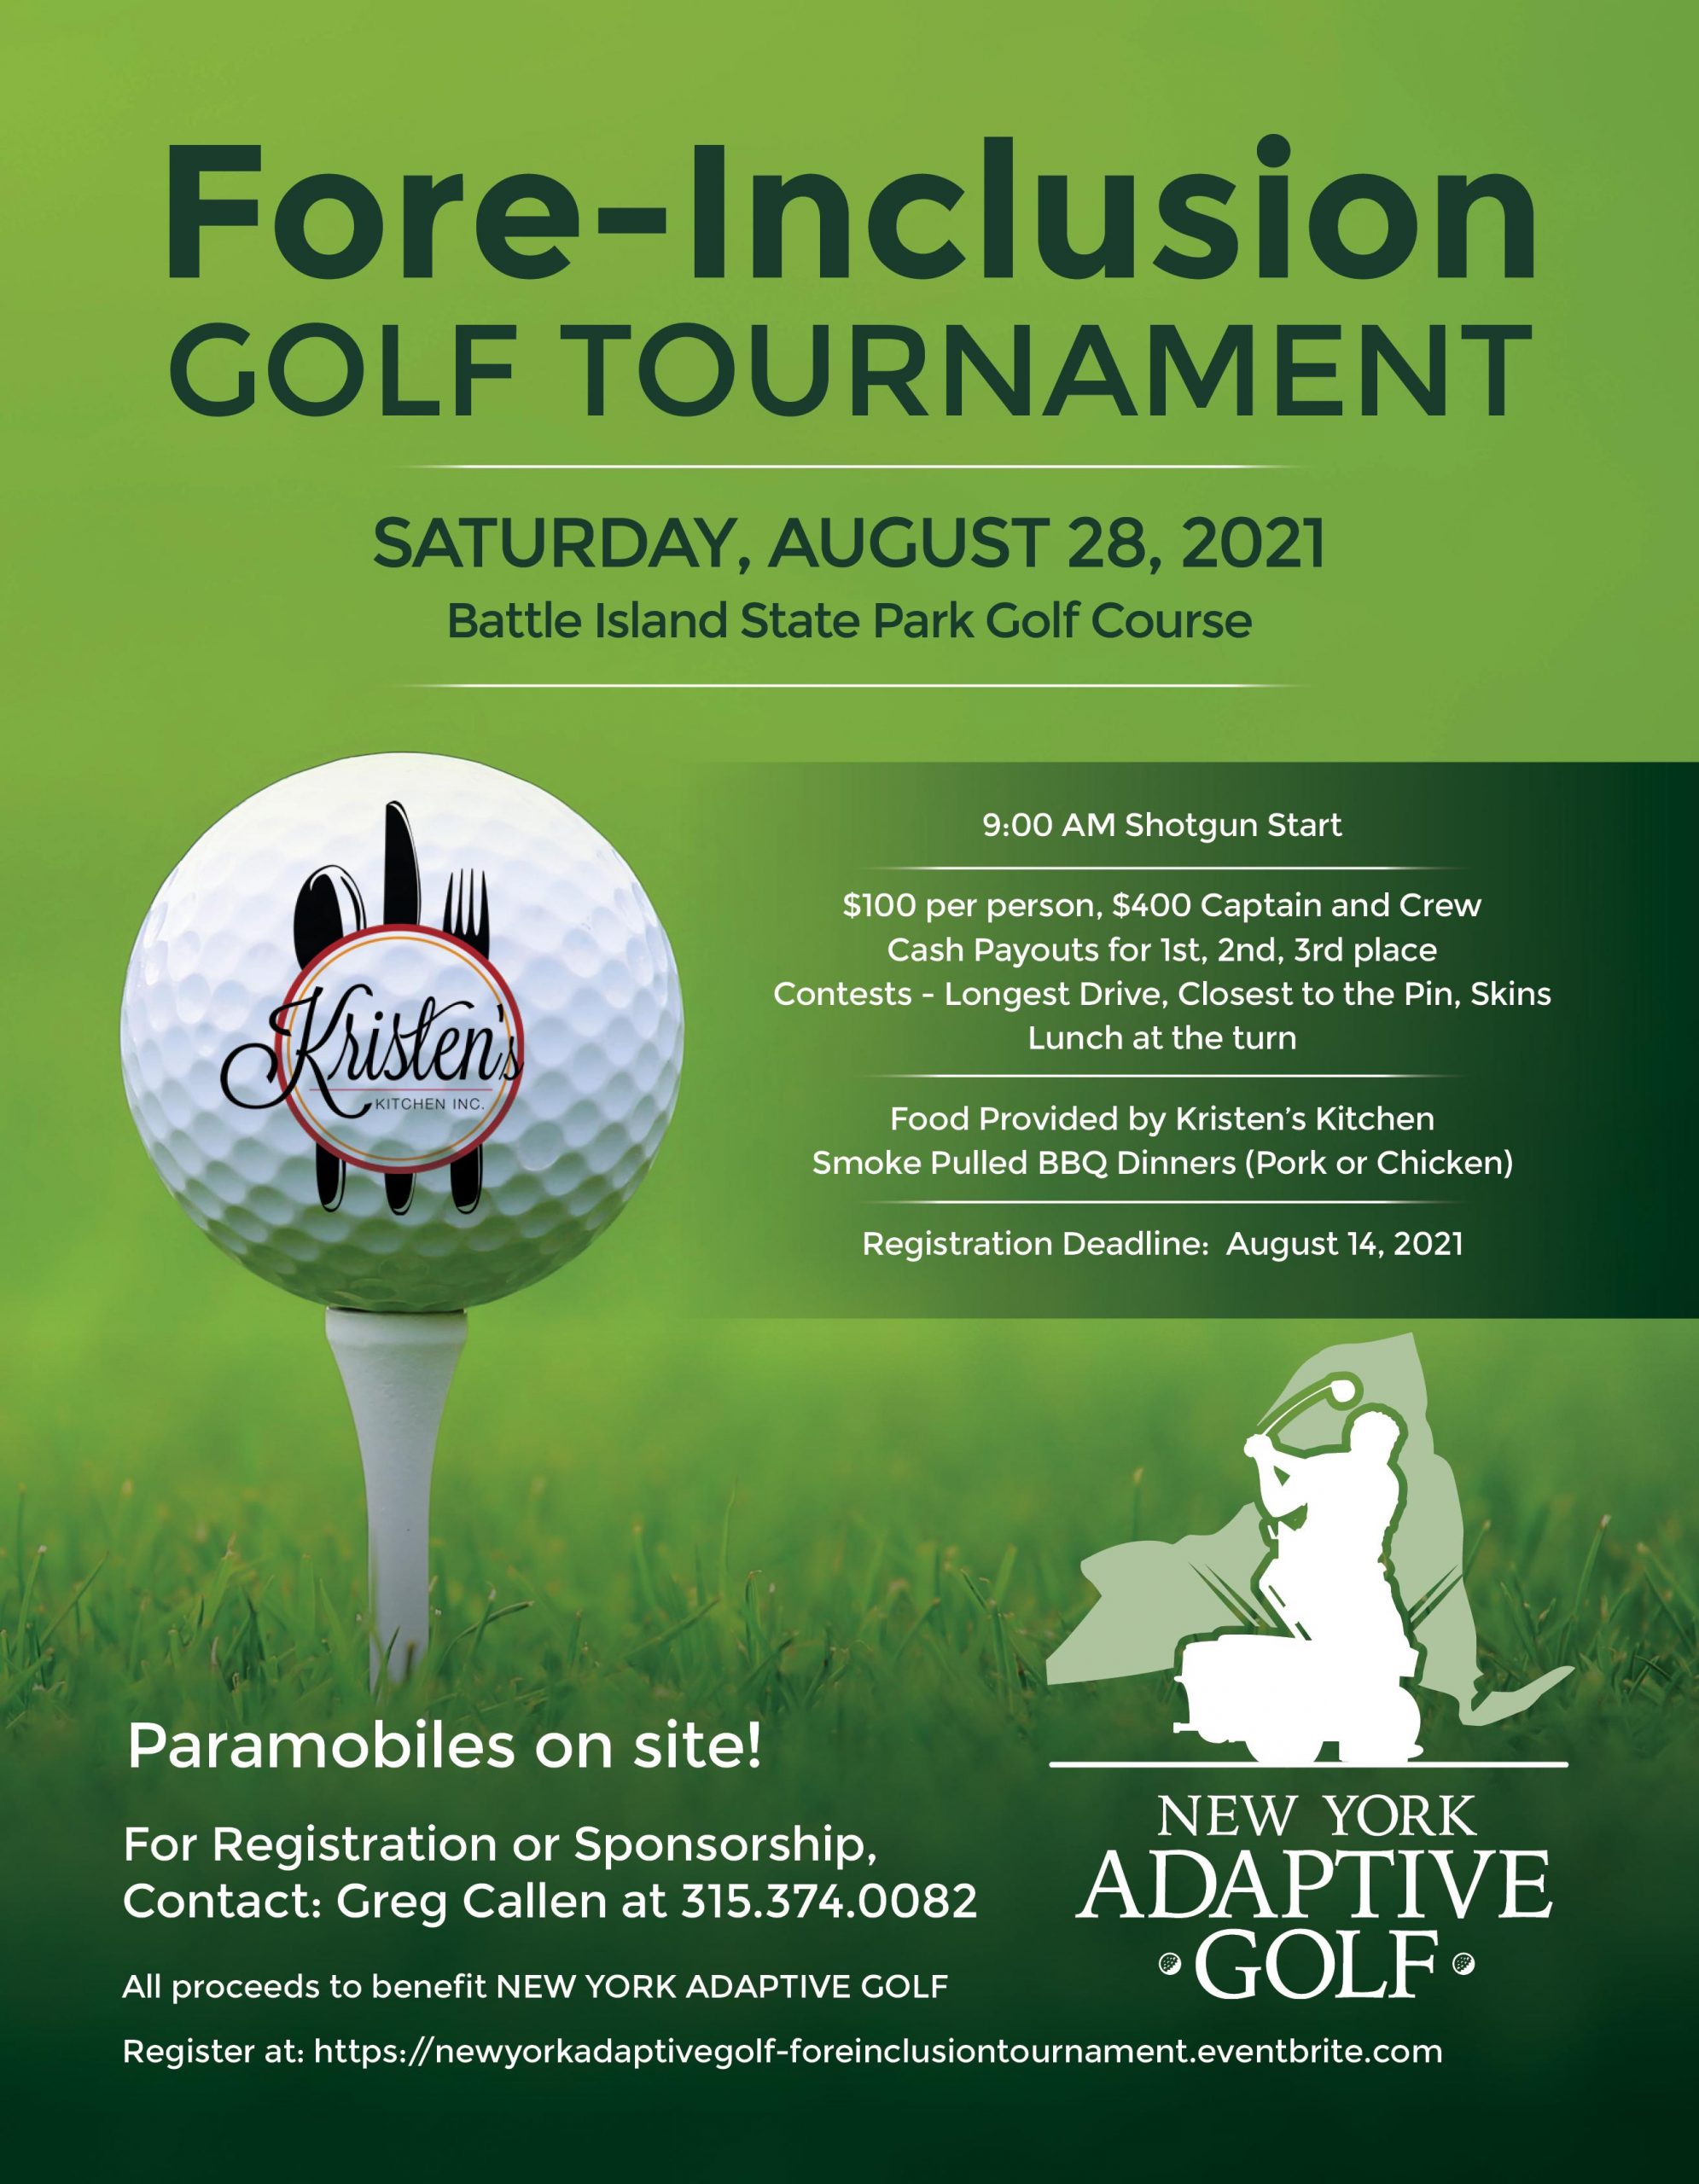 Fore-Inclusion Golf Tournament